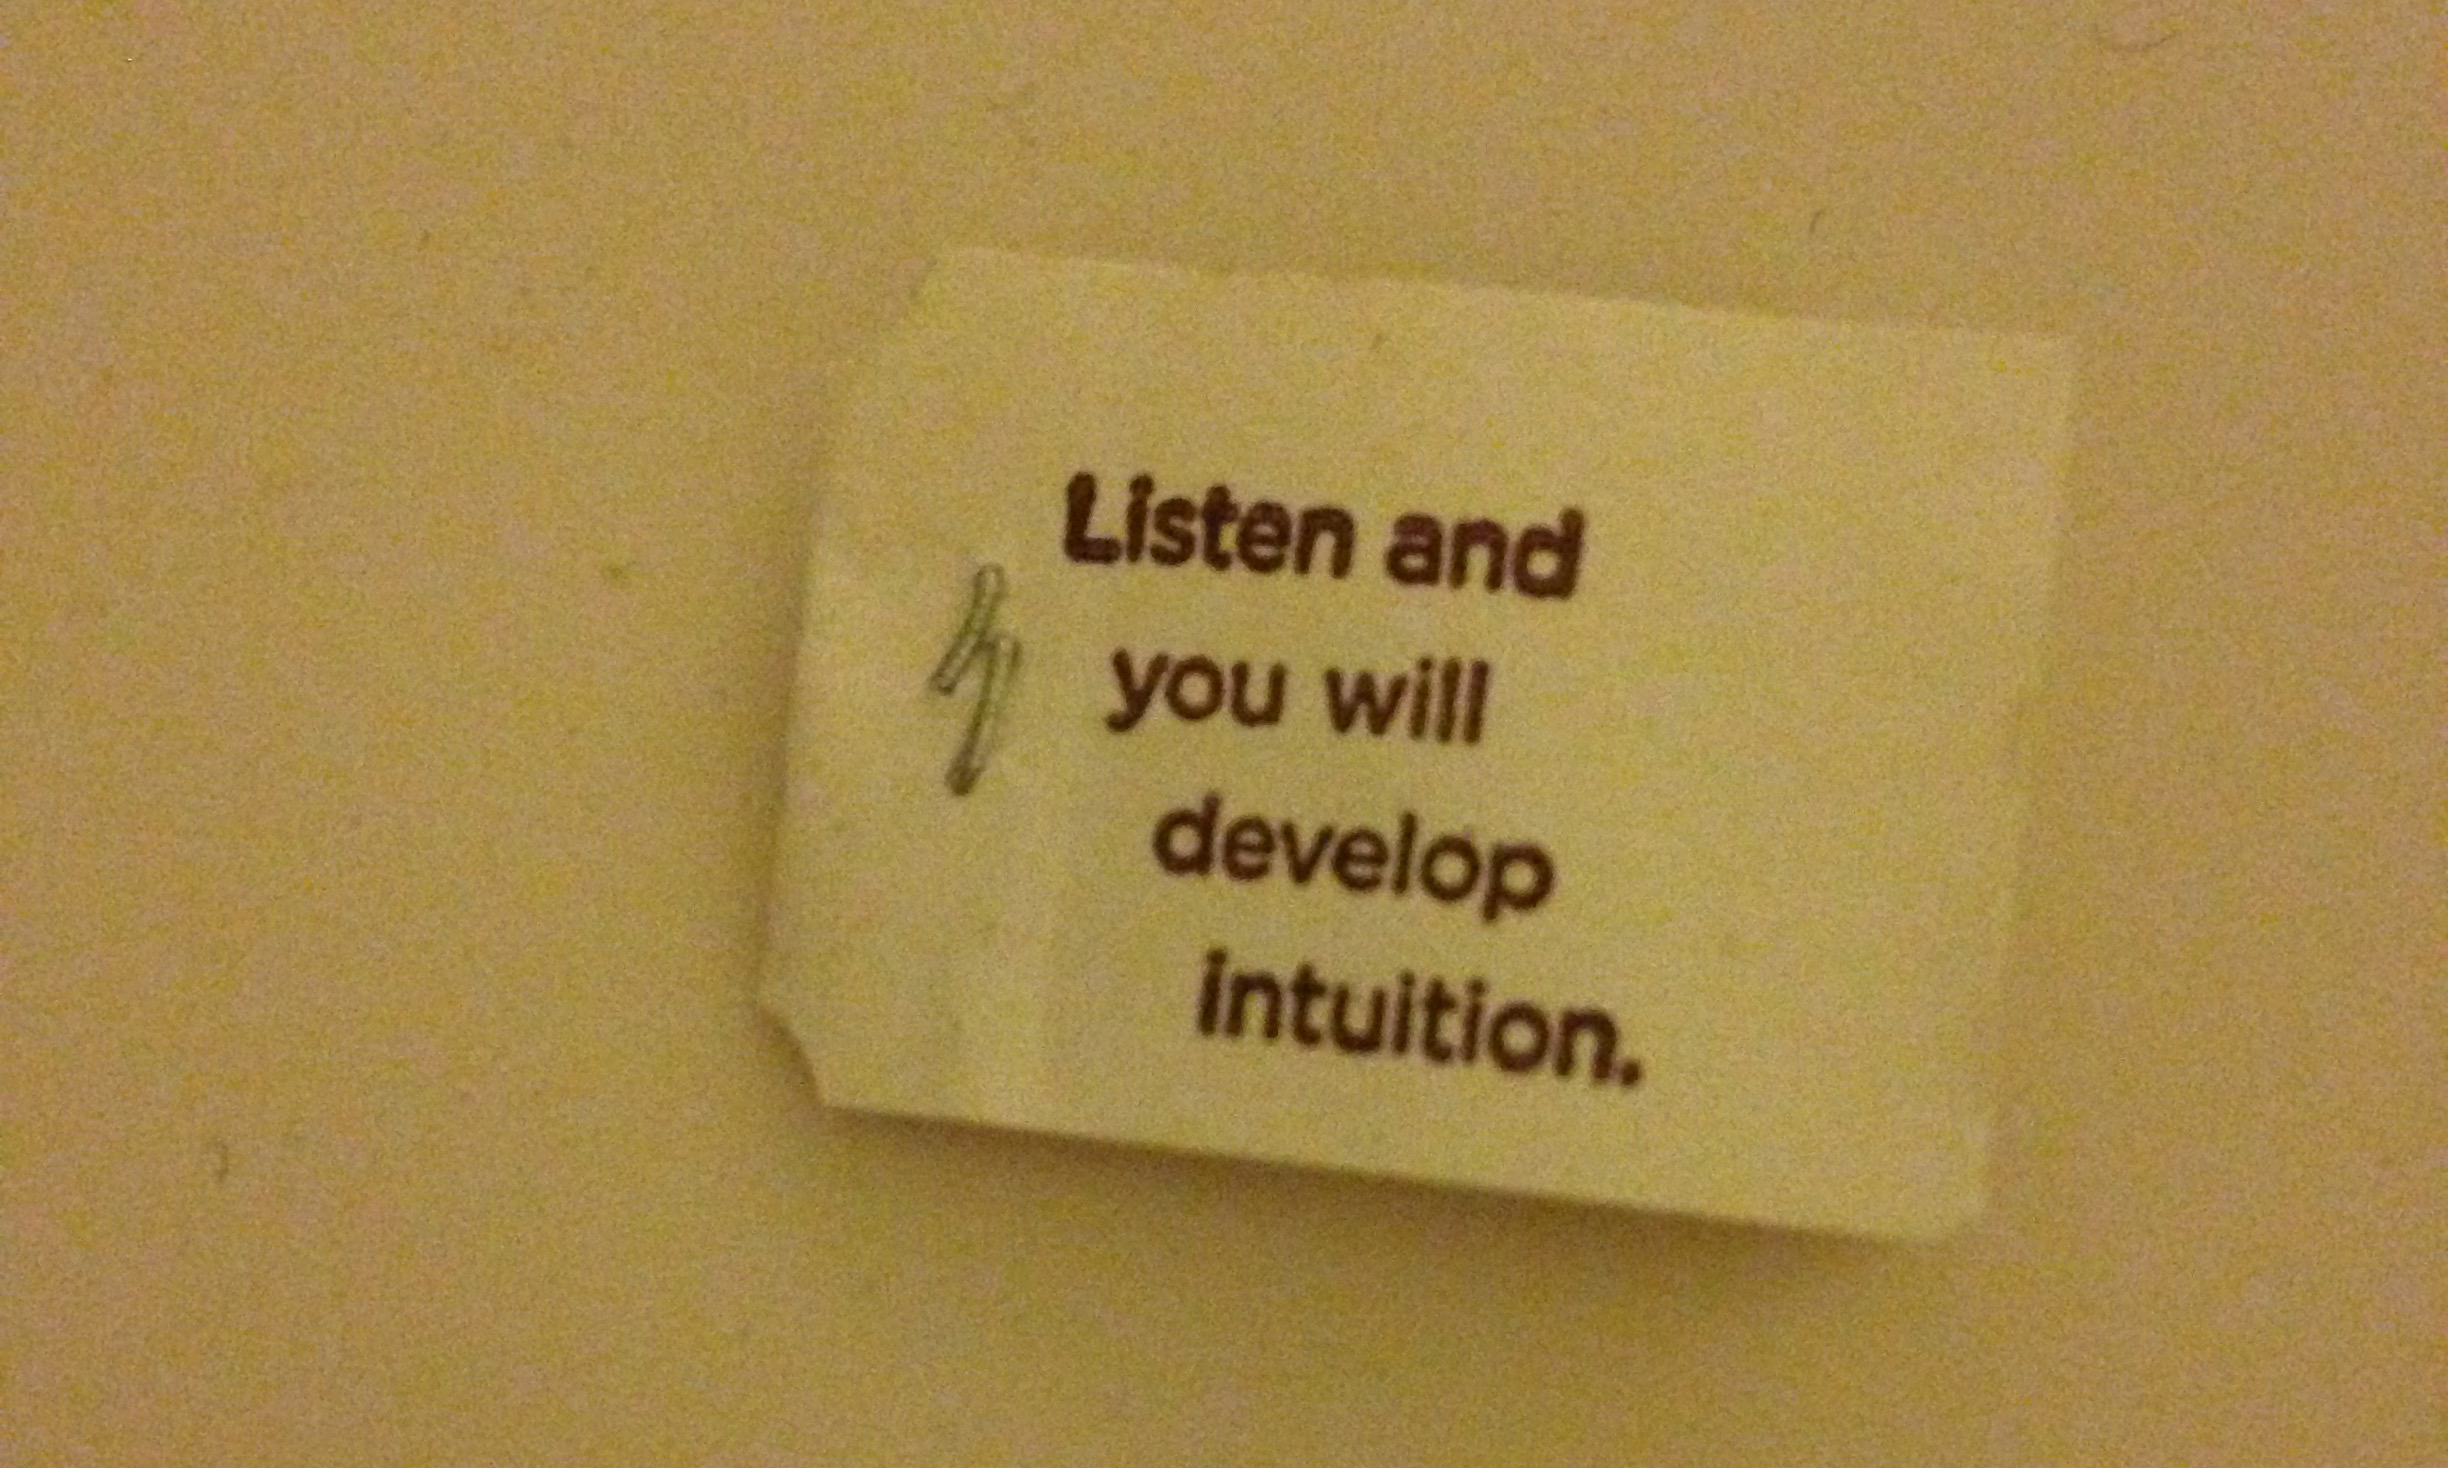 A photo of a tea bag containing the words "Listen and you will develop intuition"